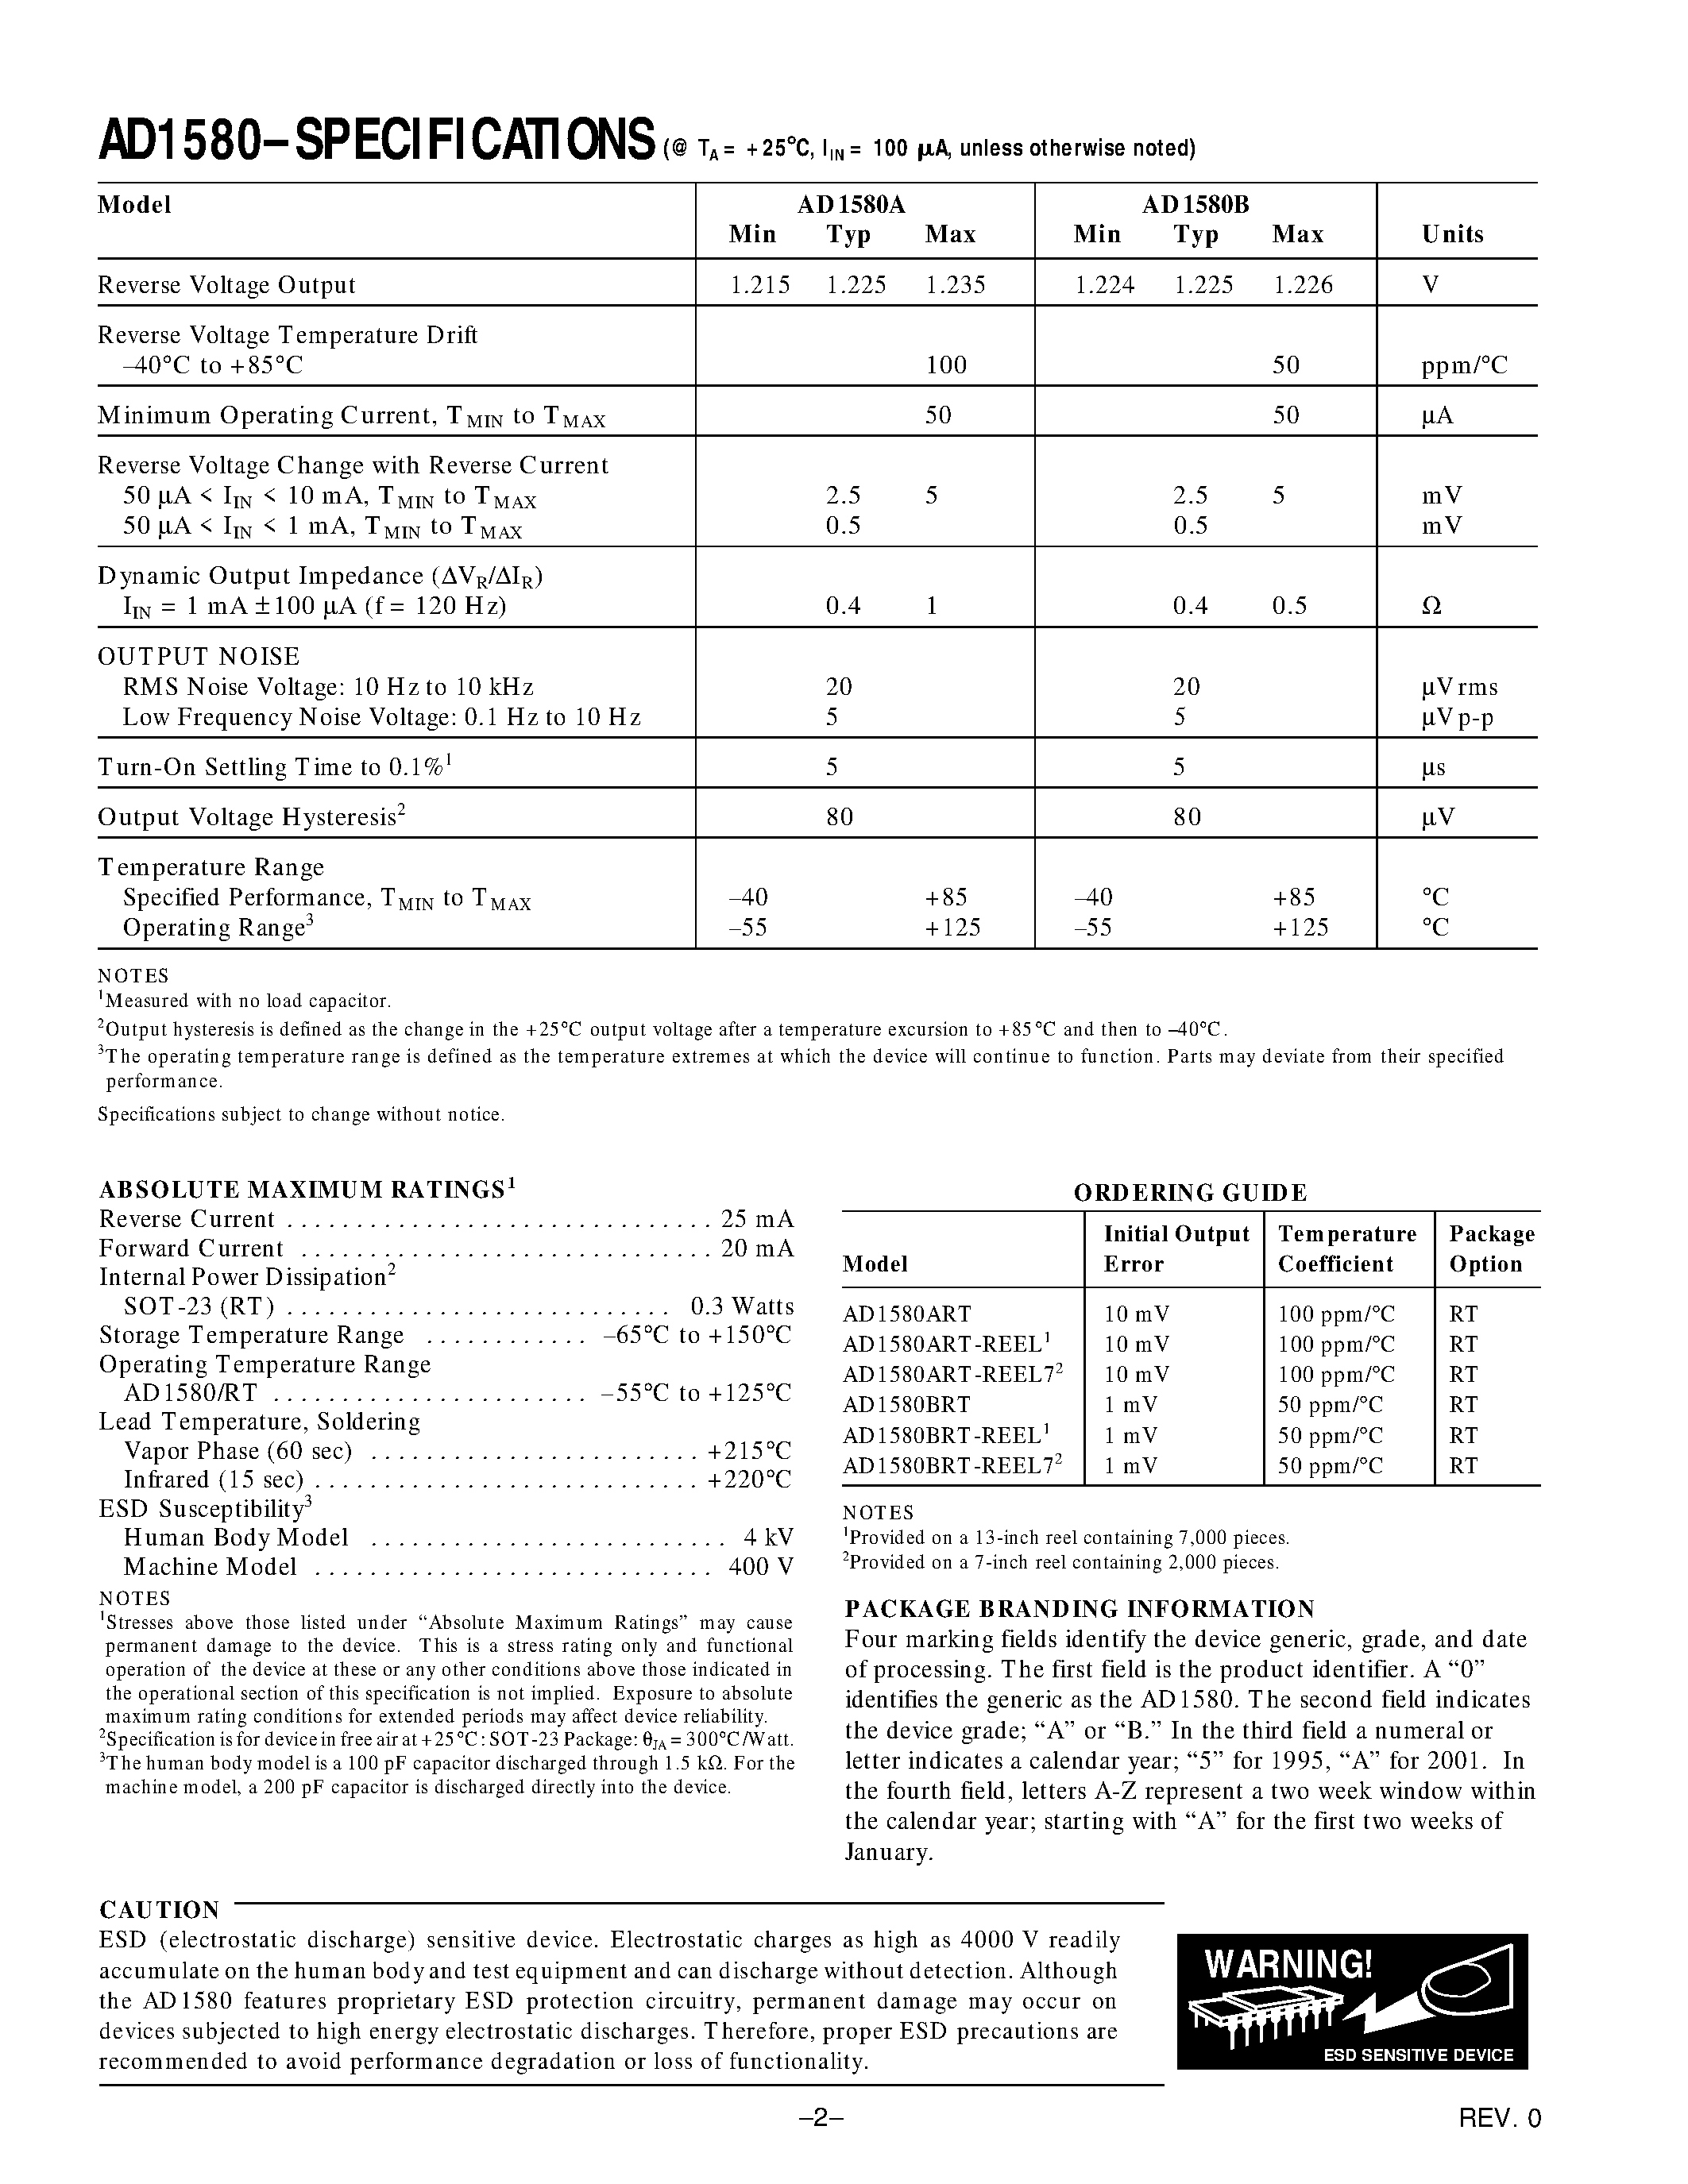 Datasheet AD1580ART-REEL1 - 1.2 V Micropower/ Precision Shunt Voltage Reference page 2